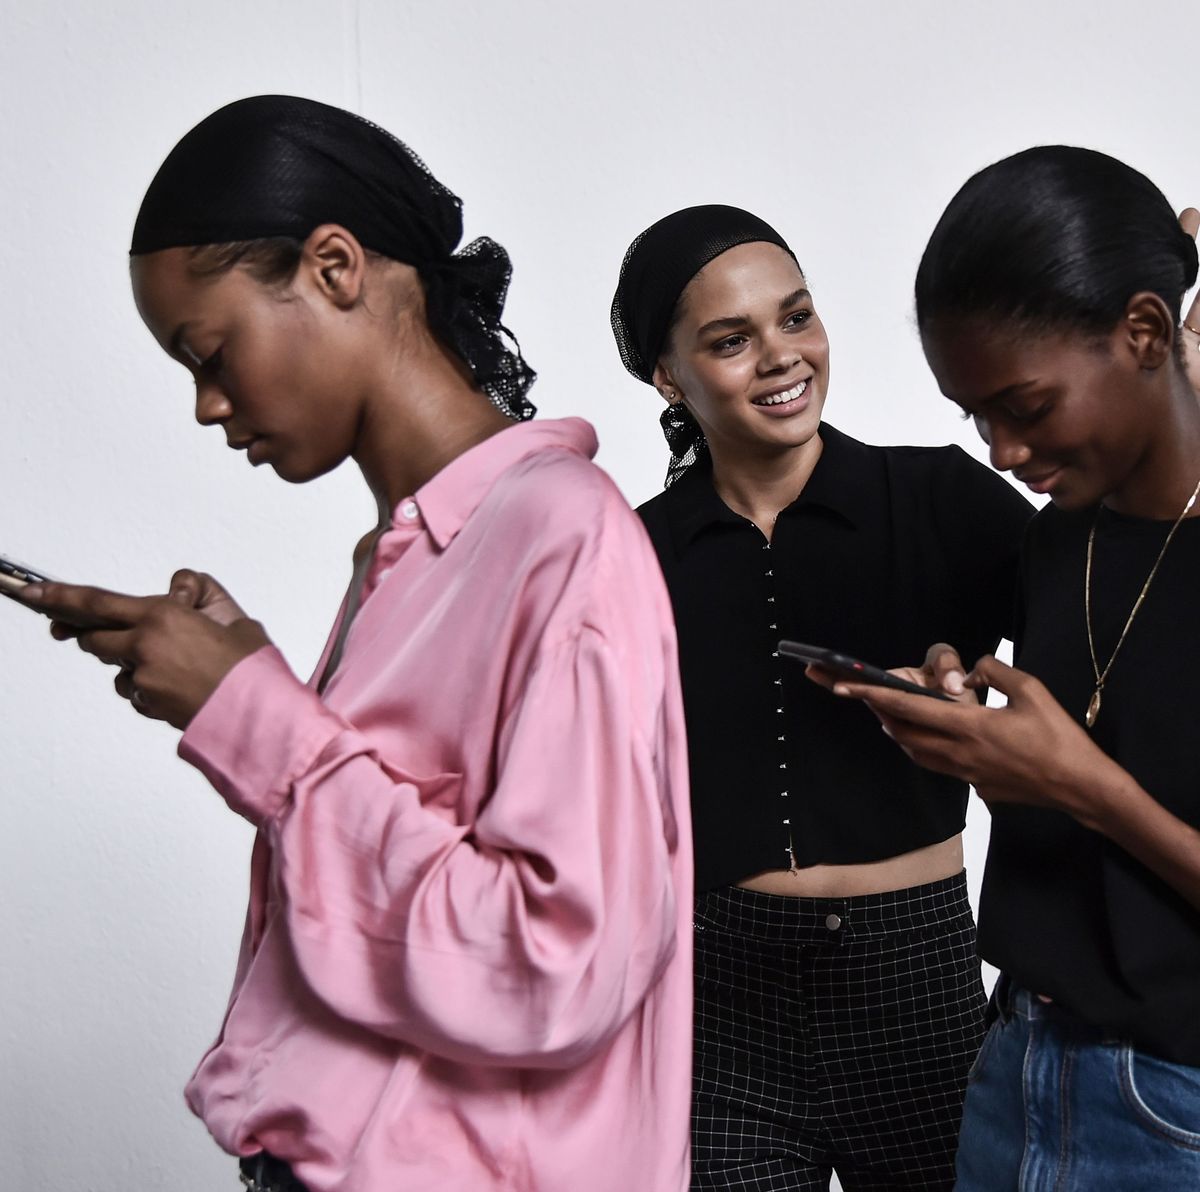 models check their mobile phone as they wait in the backstage before the philosophy di lorenzo serafini fashion show, as part of the womens springsummer 2019 fashion week in milan, on september 22, 2018 photo by marco bertorello  afp        photo credit should read marco bertorelloafp via getty images